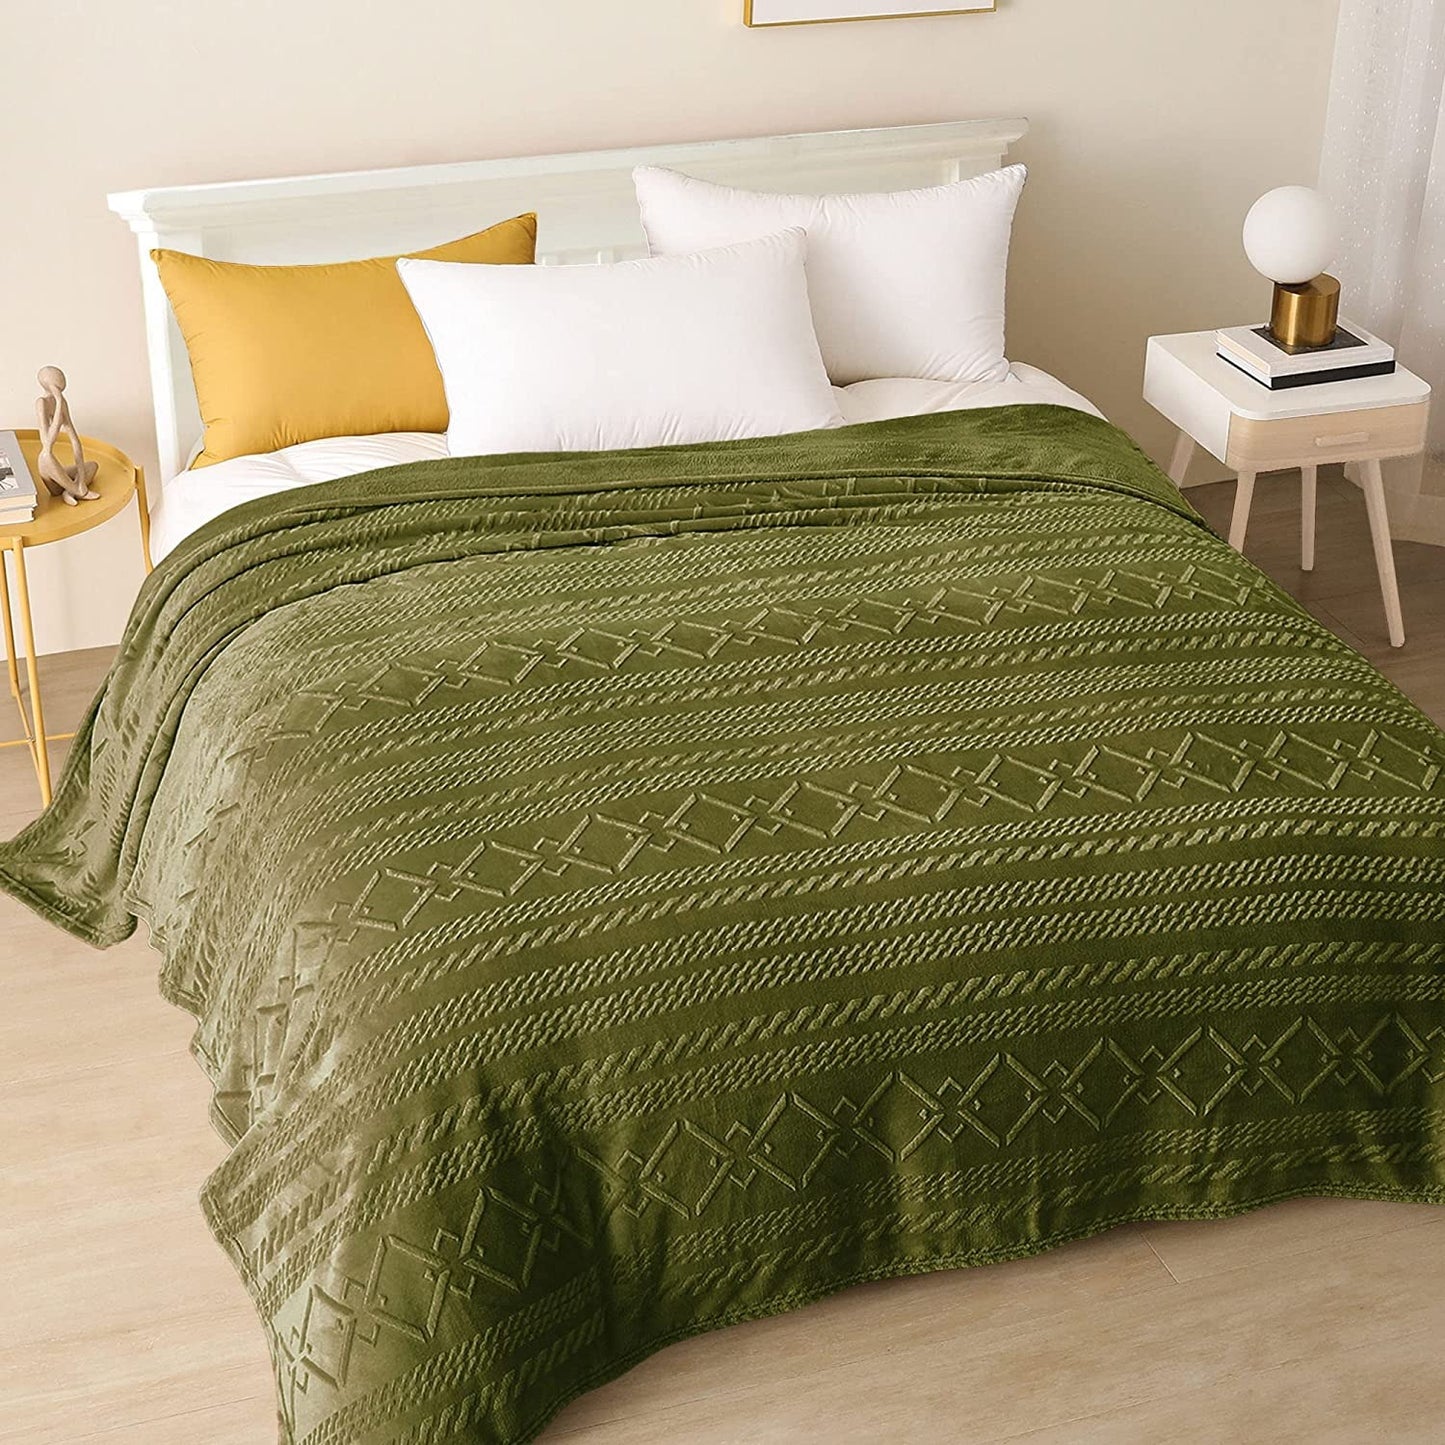 Exclusivo Mezcla Queen Size Soft Bed Blanket, Warm Fuzzy Luxury Bed Blankets, Decorative Geometry Pattern Plush Throw Blanket for Bed, 90x90 Inches, Olive Green